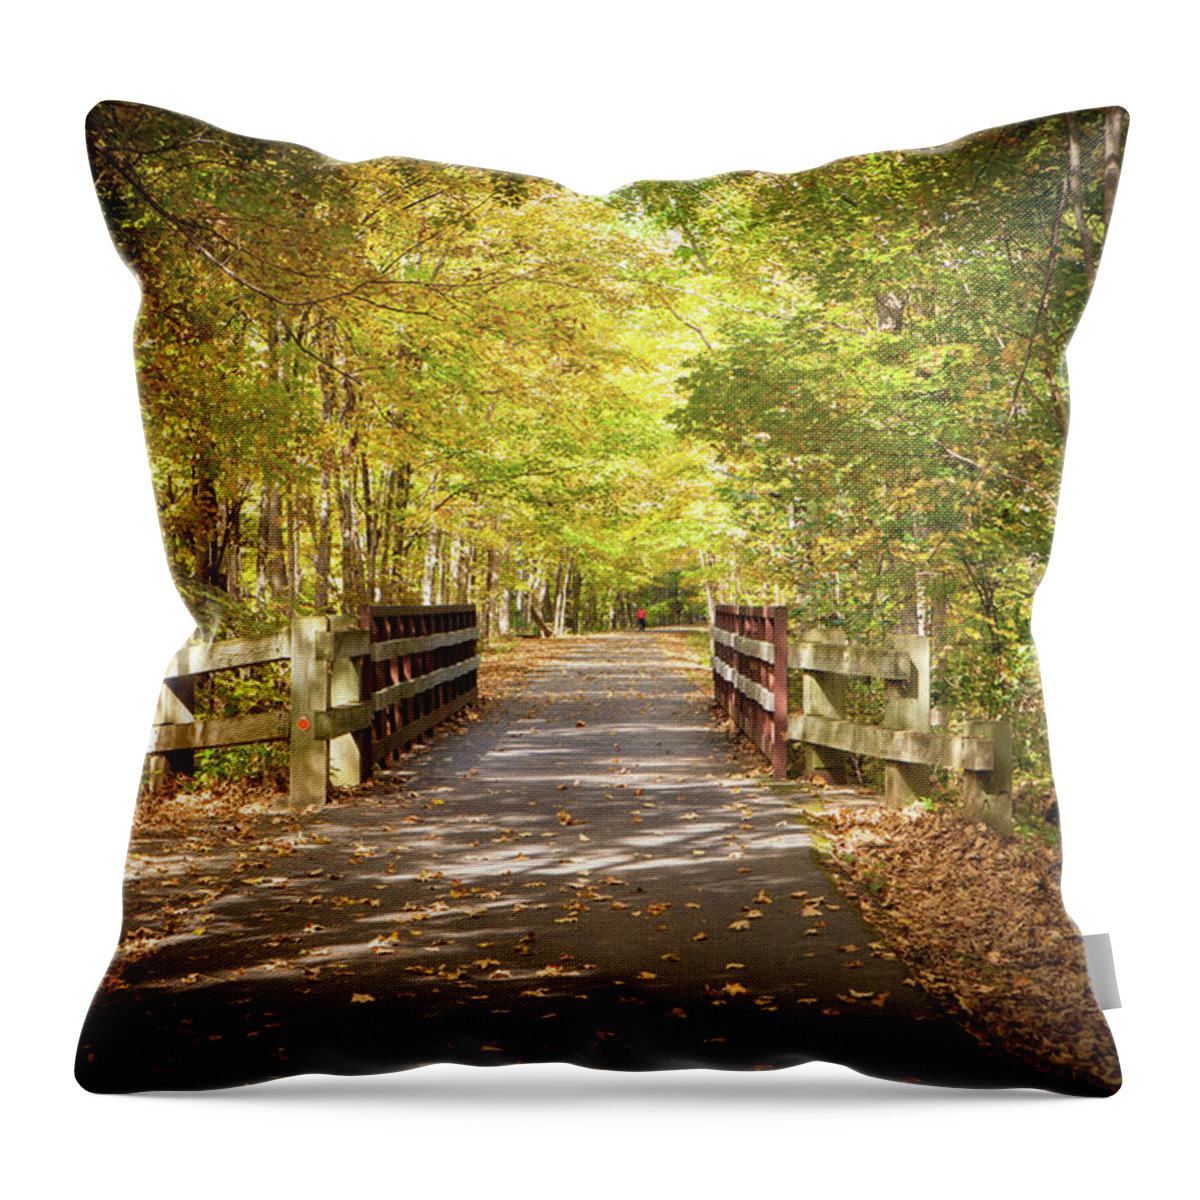 Bridge Throw Pillow featuring the photograph Wooden Bridge_7845 by Rocco Leone